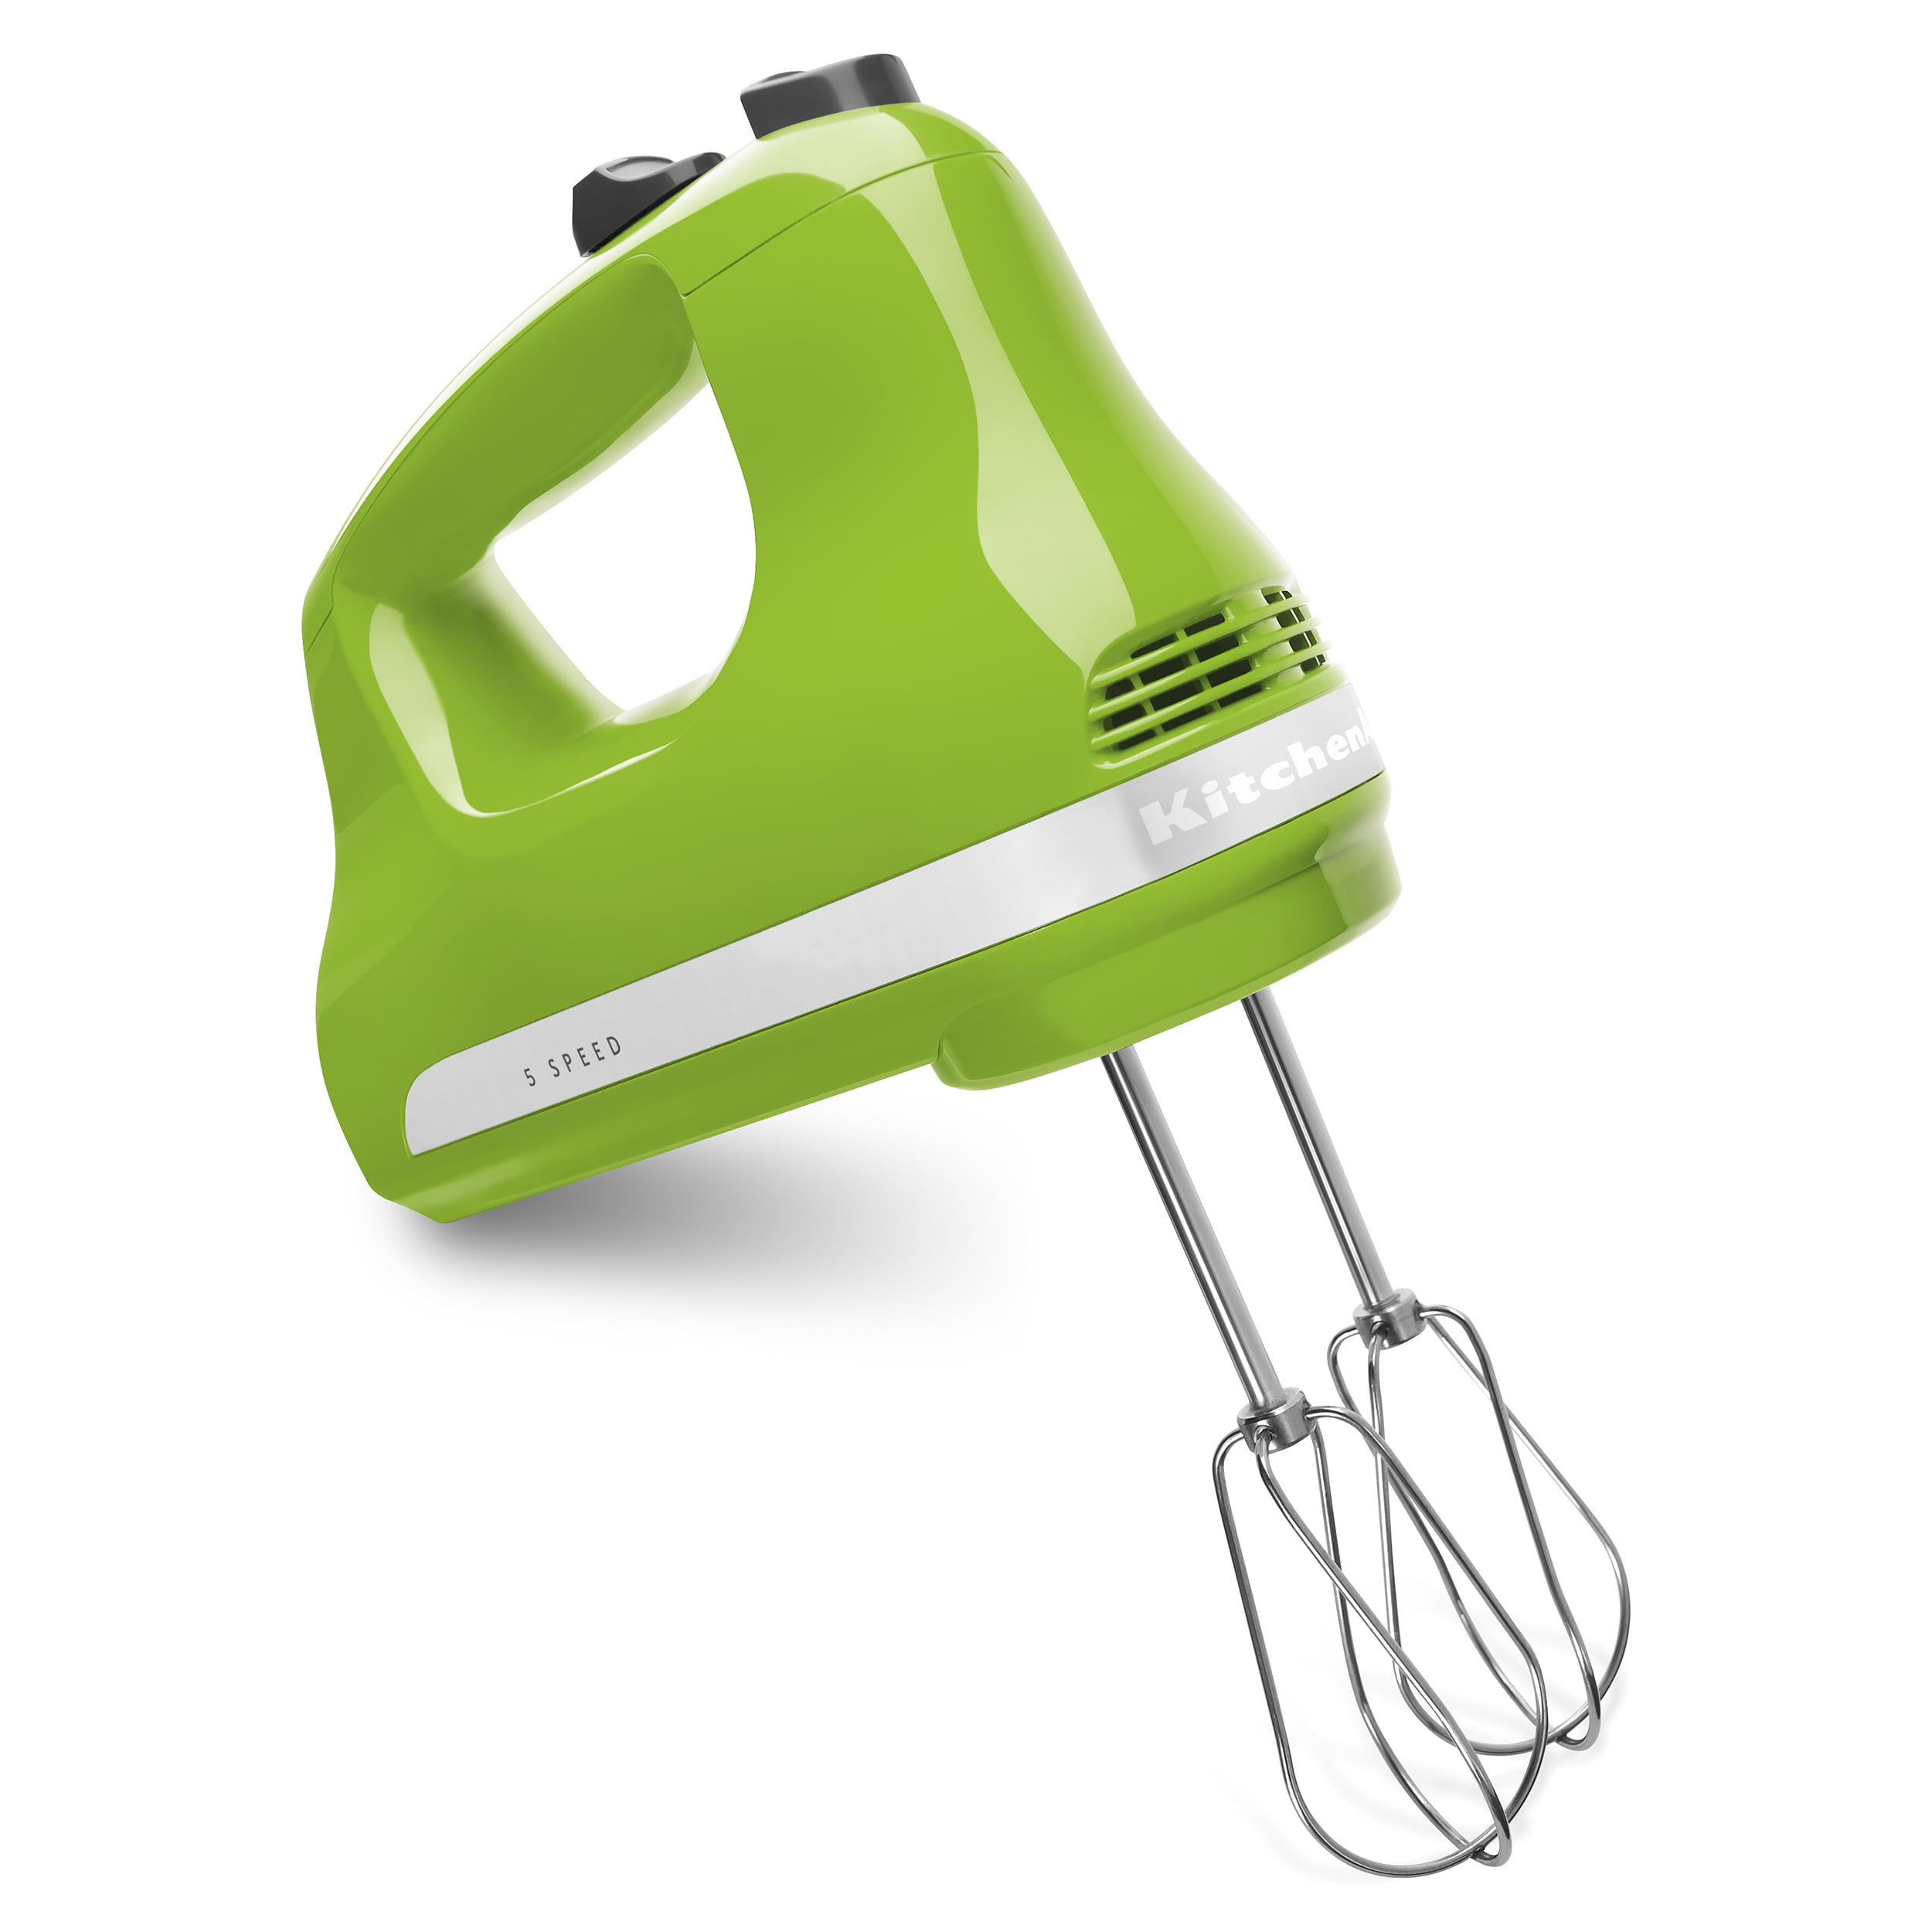 KitchenAid® 6 Speed Hand Mixer with Flex Edge Beaters & Reviews